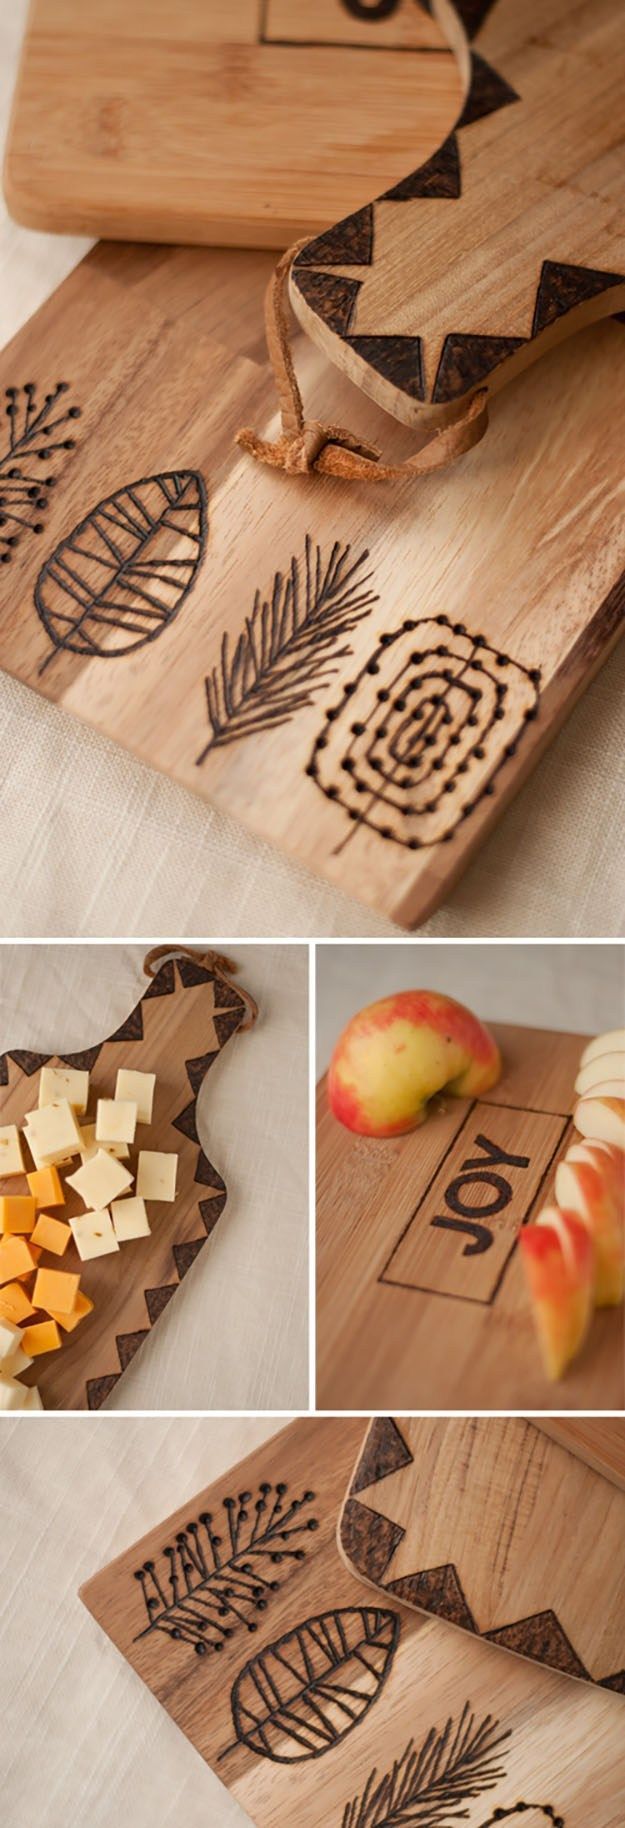 The 10 Prettiest DIY Gifts You'd Never Know Are DIY - The 10 Prettiest DIY Gifts You'd Never Know Are DIY -   17 diy Gifts wood ideas